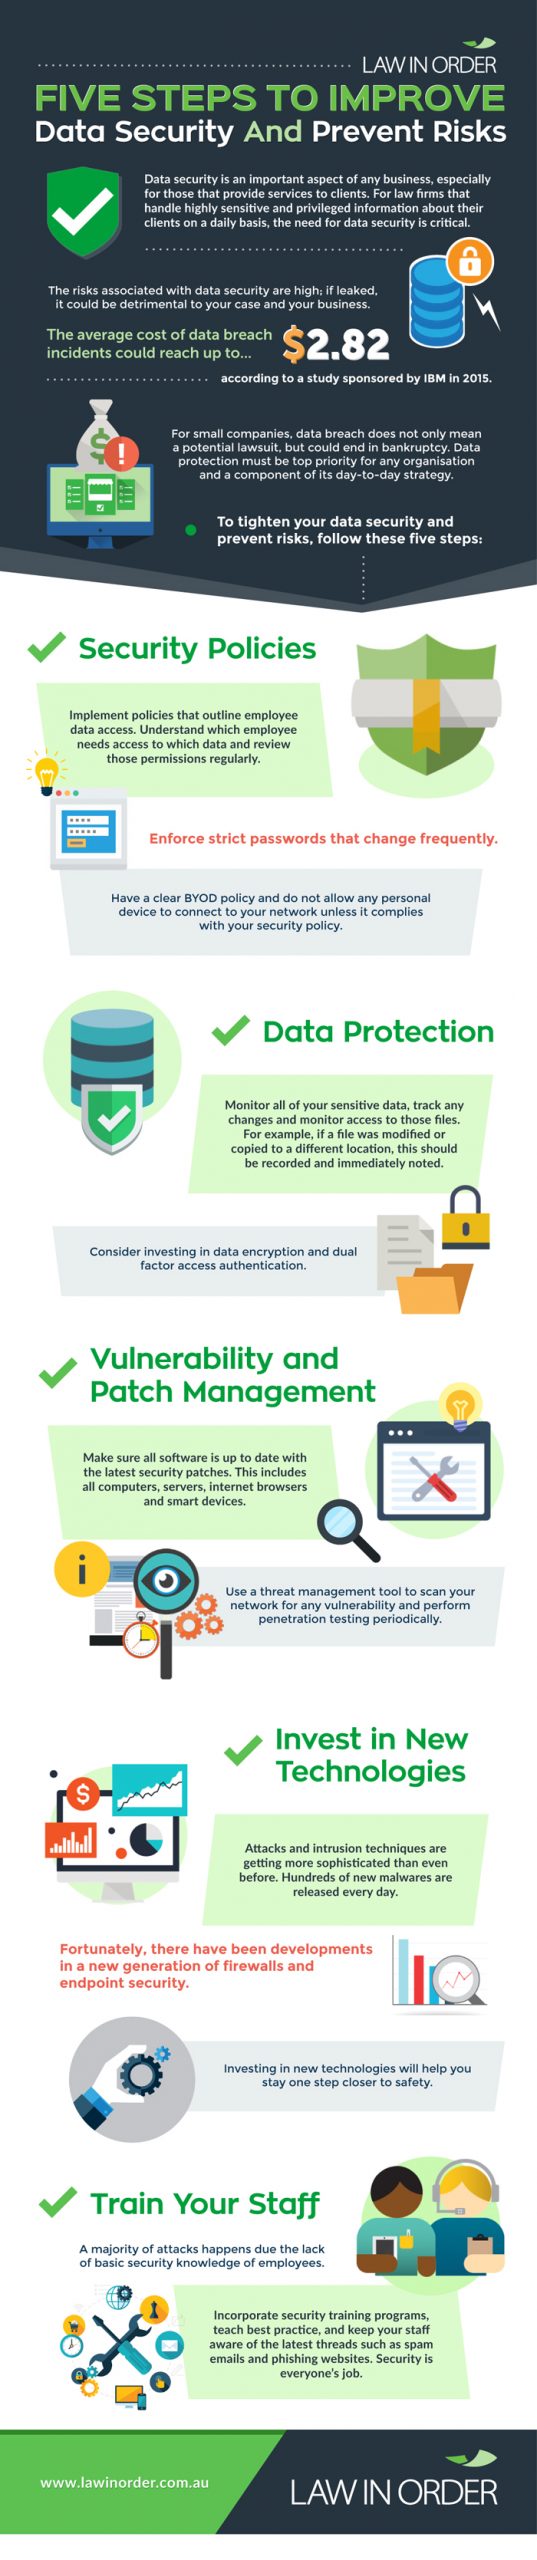 Five steps to improve data security and prevent risks